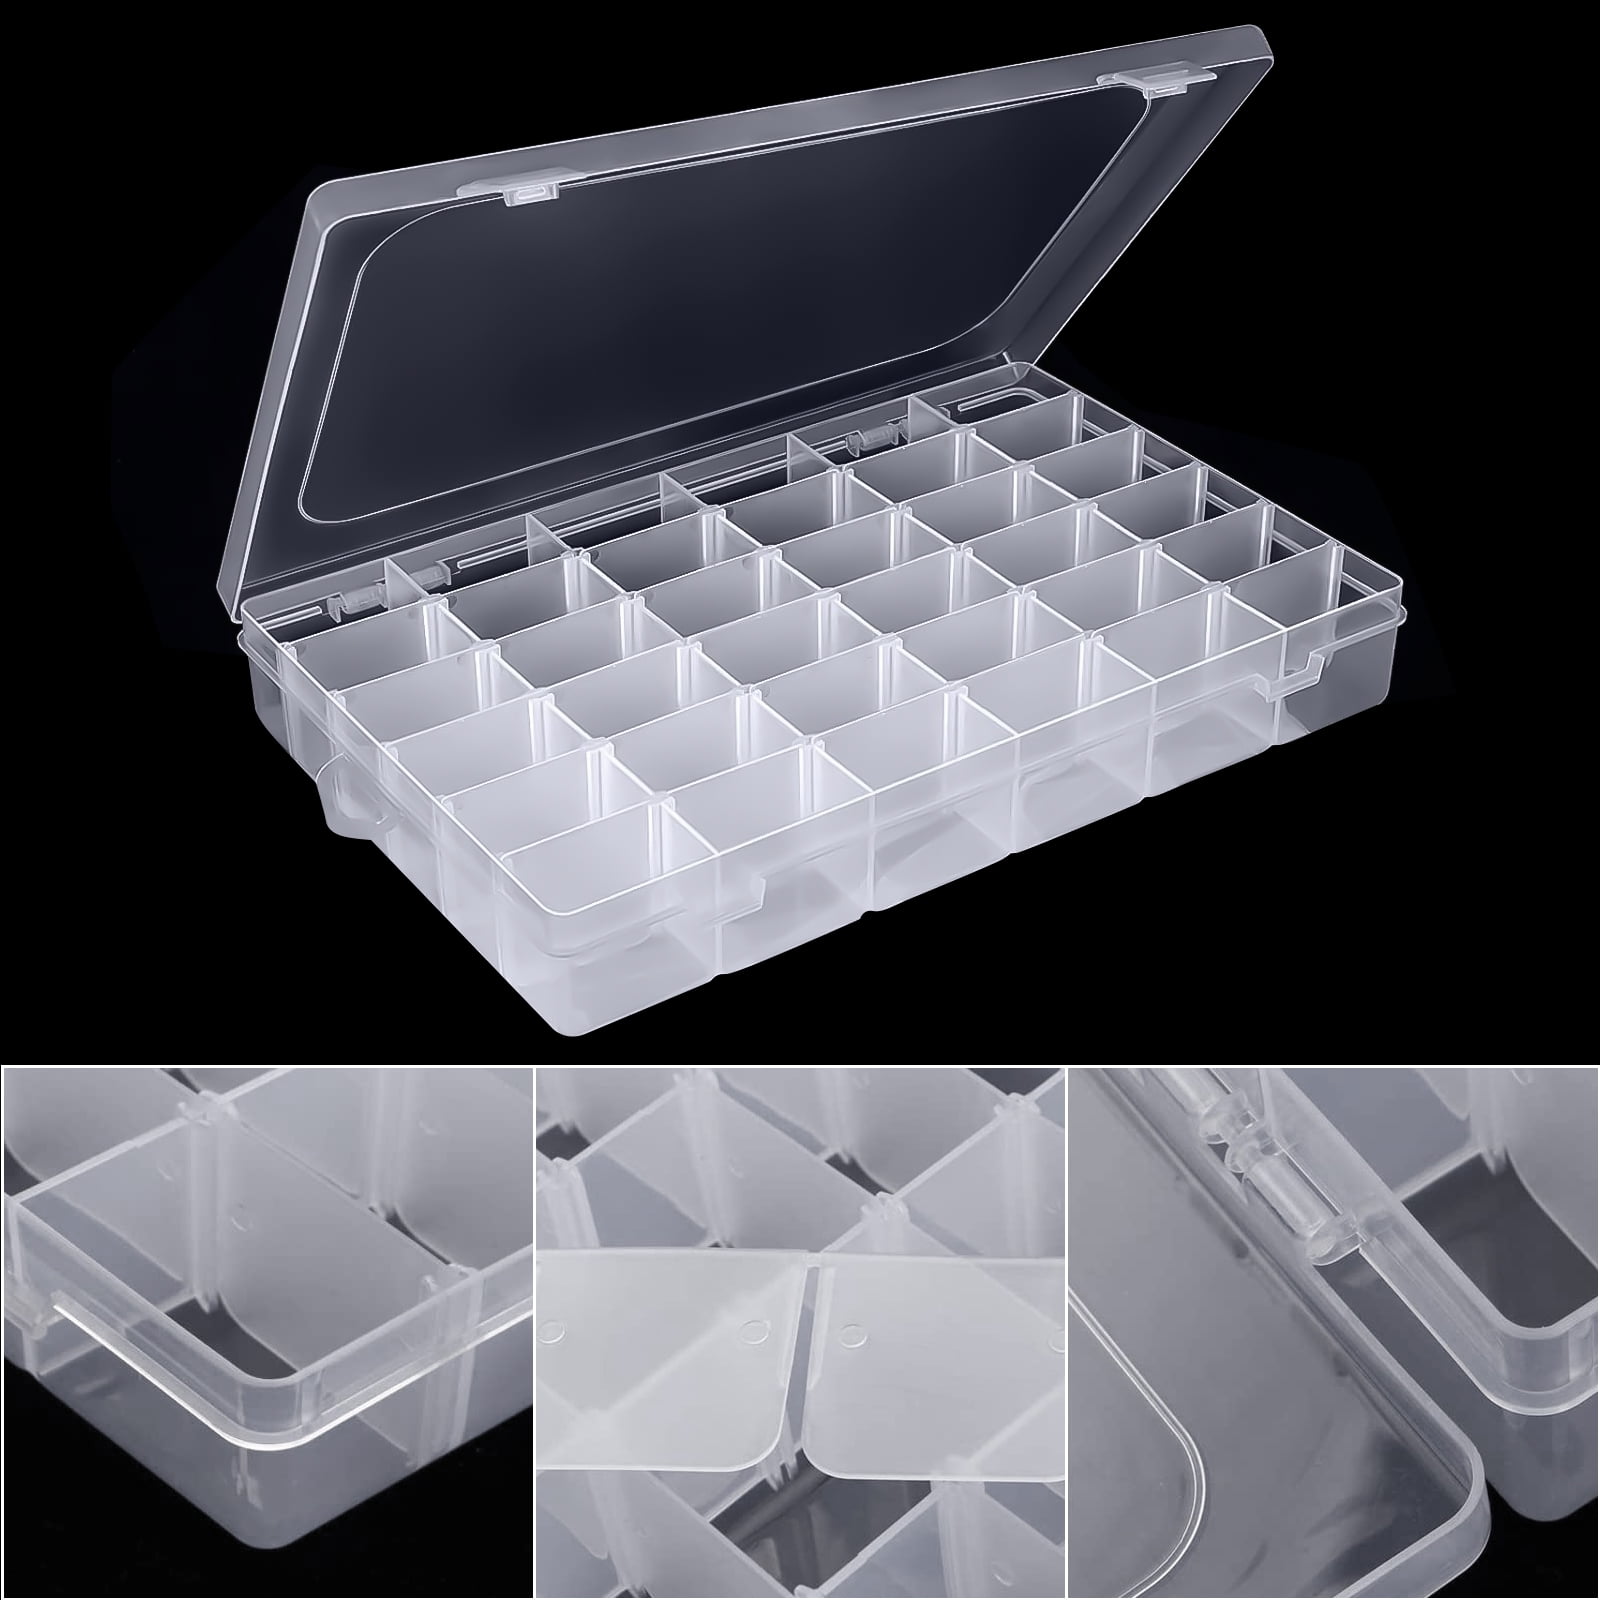 New Clear Plastic Jewelry Bead Storage Box Container Organizer Case Craft S1P3 